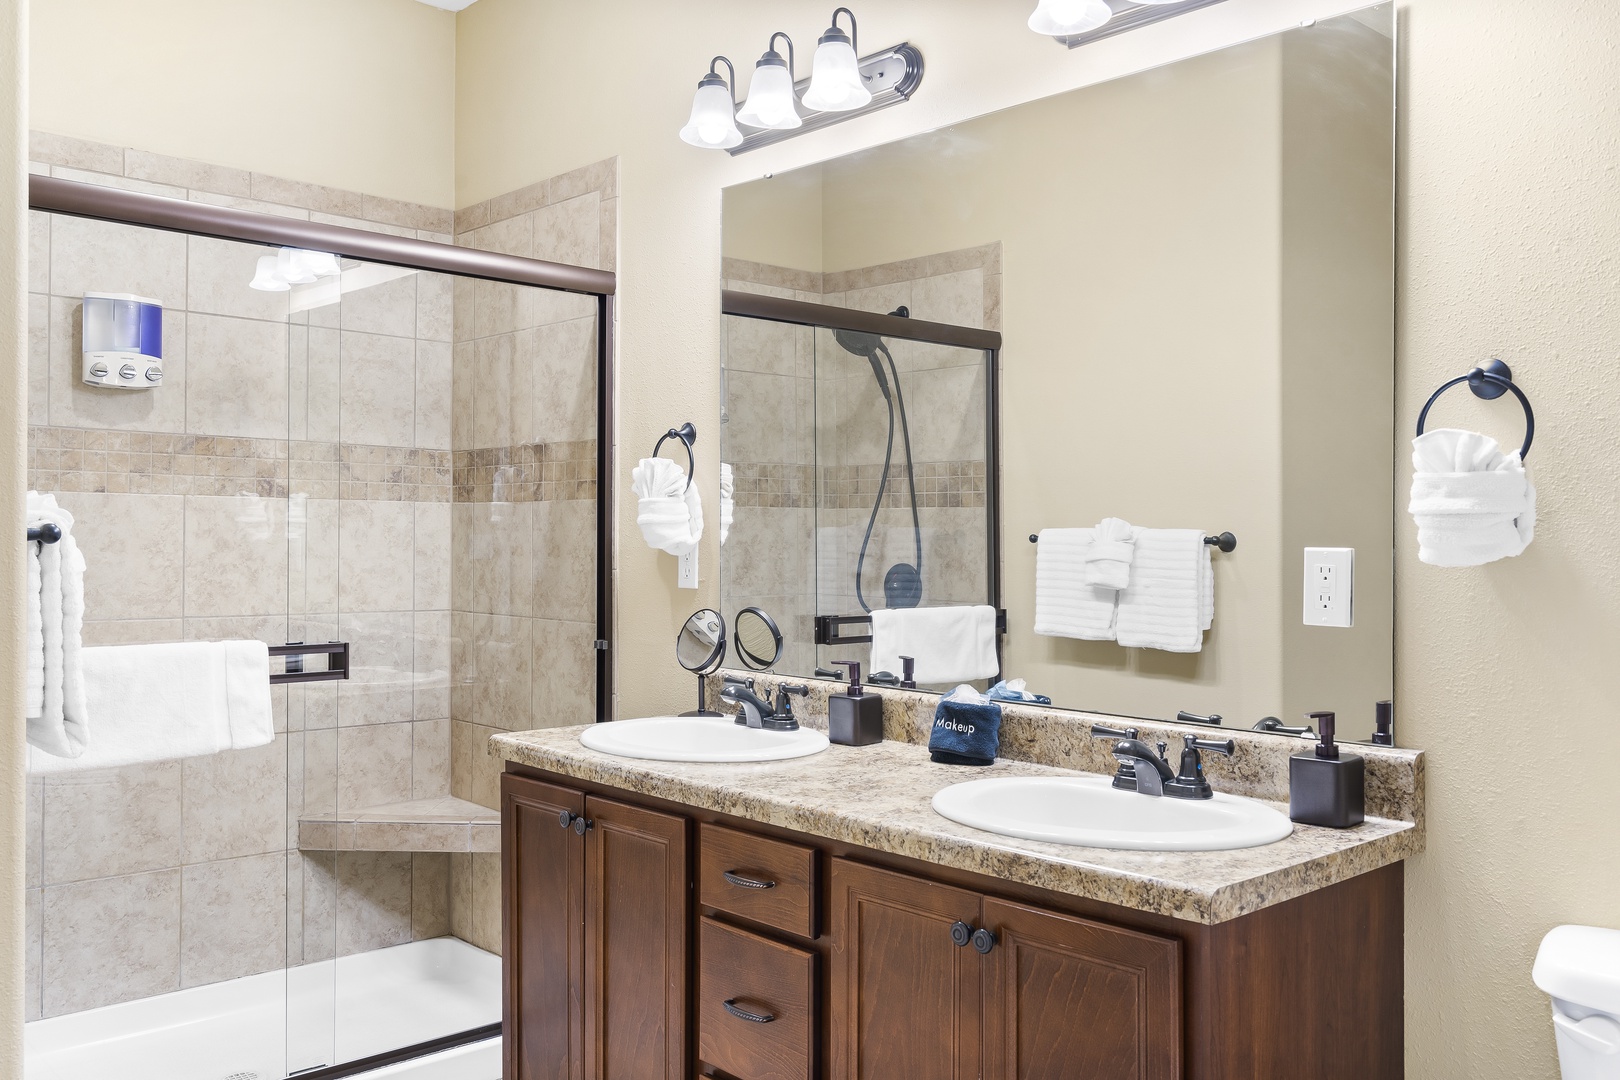 The master ensuite bath offers a double vanity & glass shower